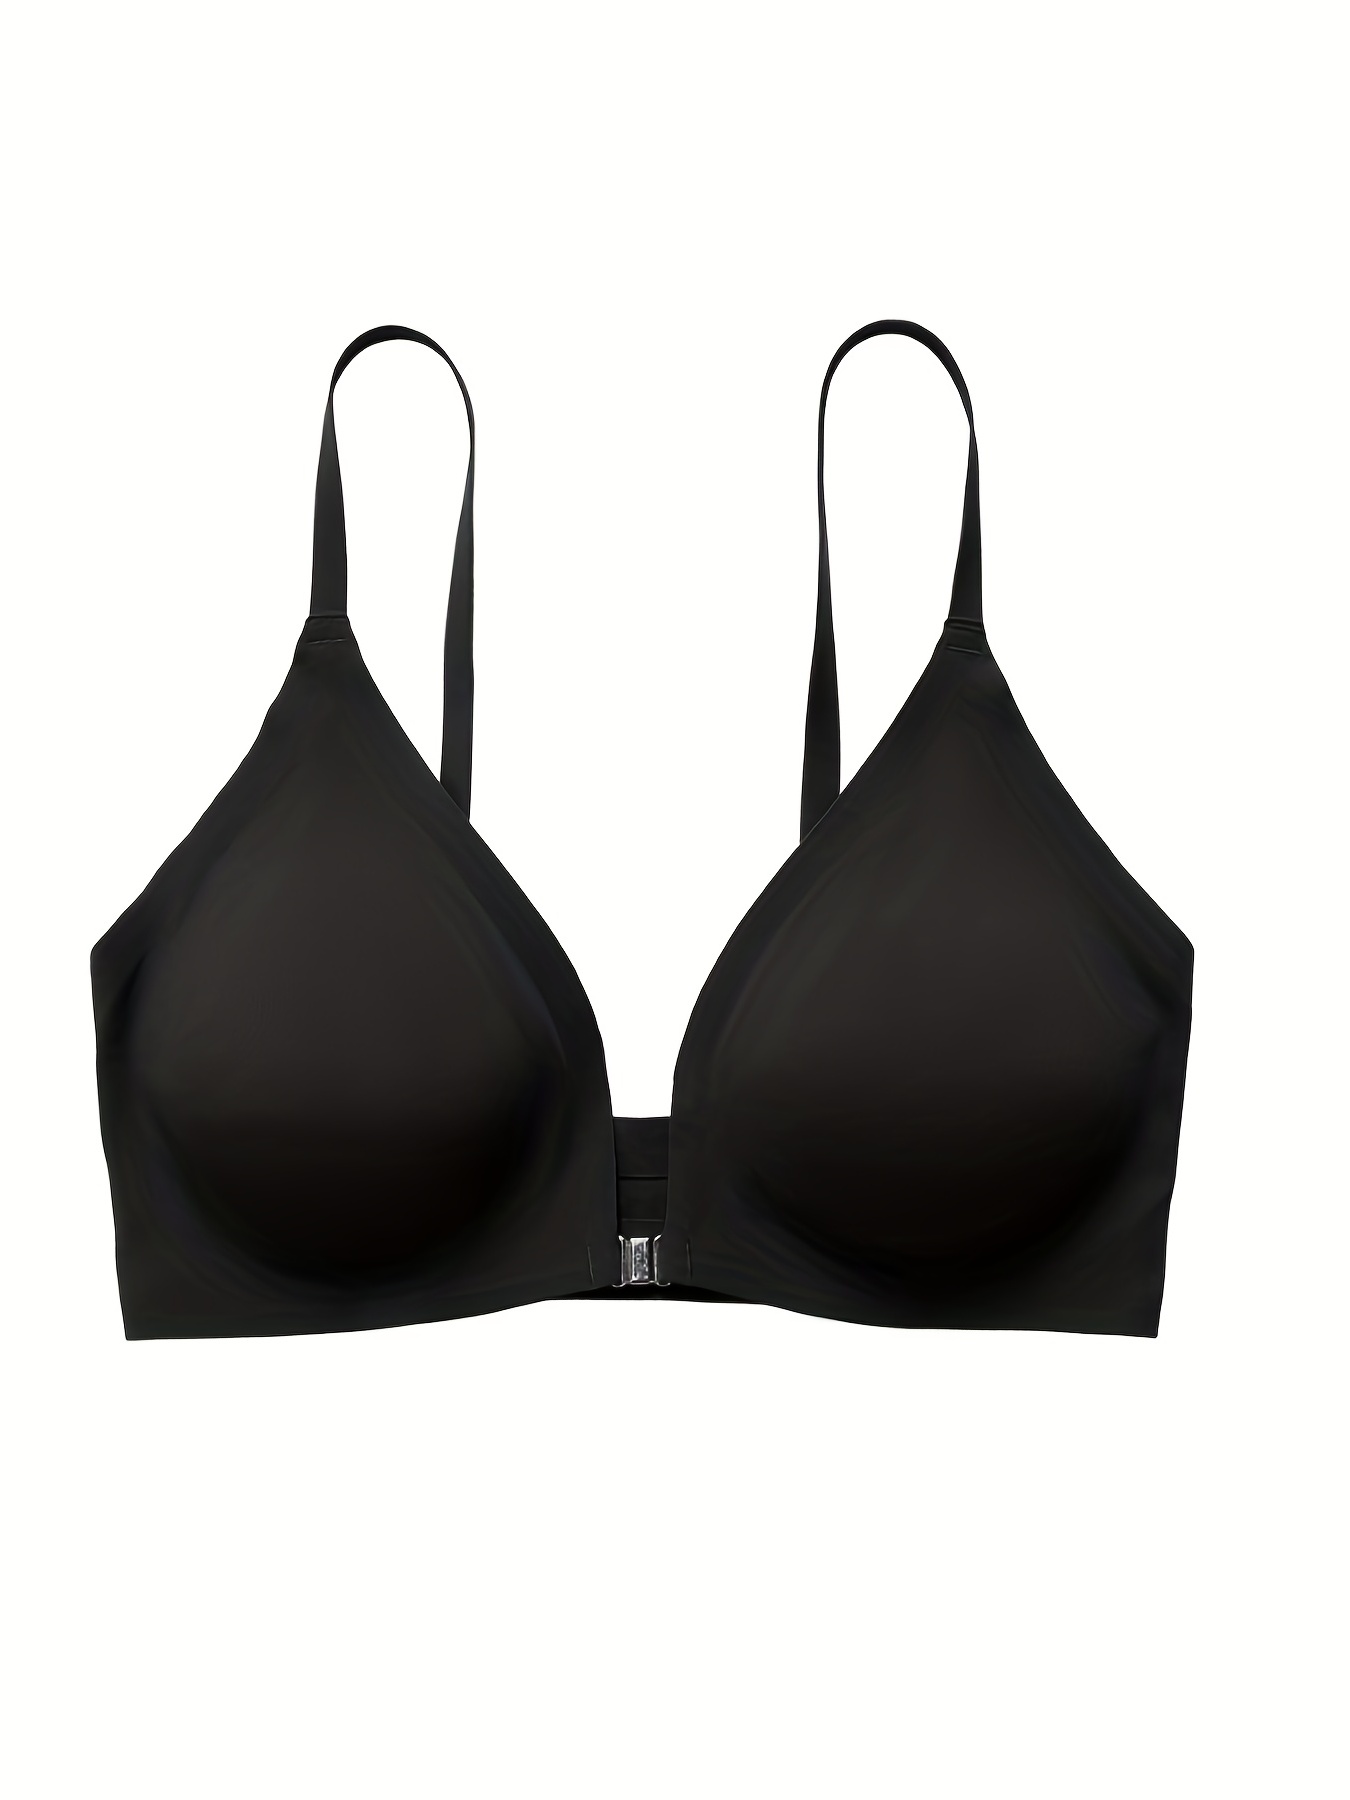 New Arrival Women Bra Front Buckle Thin Padded Push Up Strength